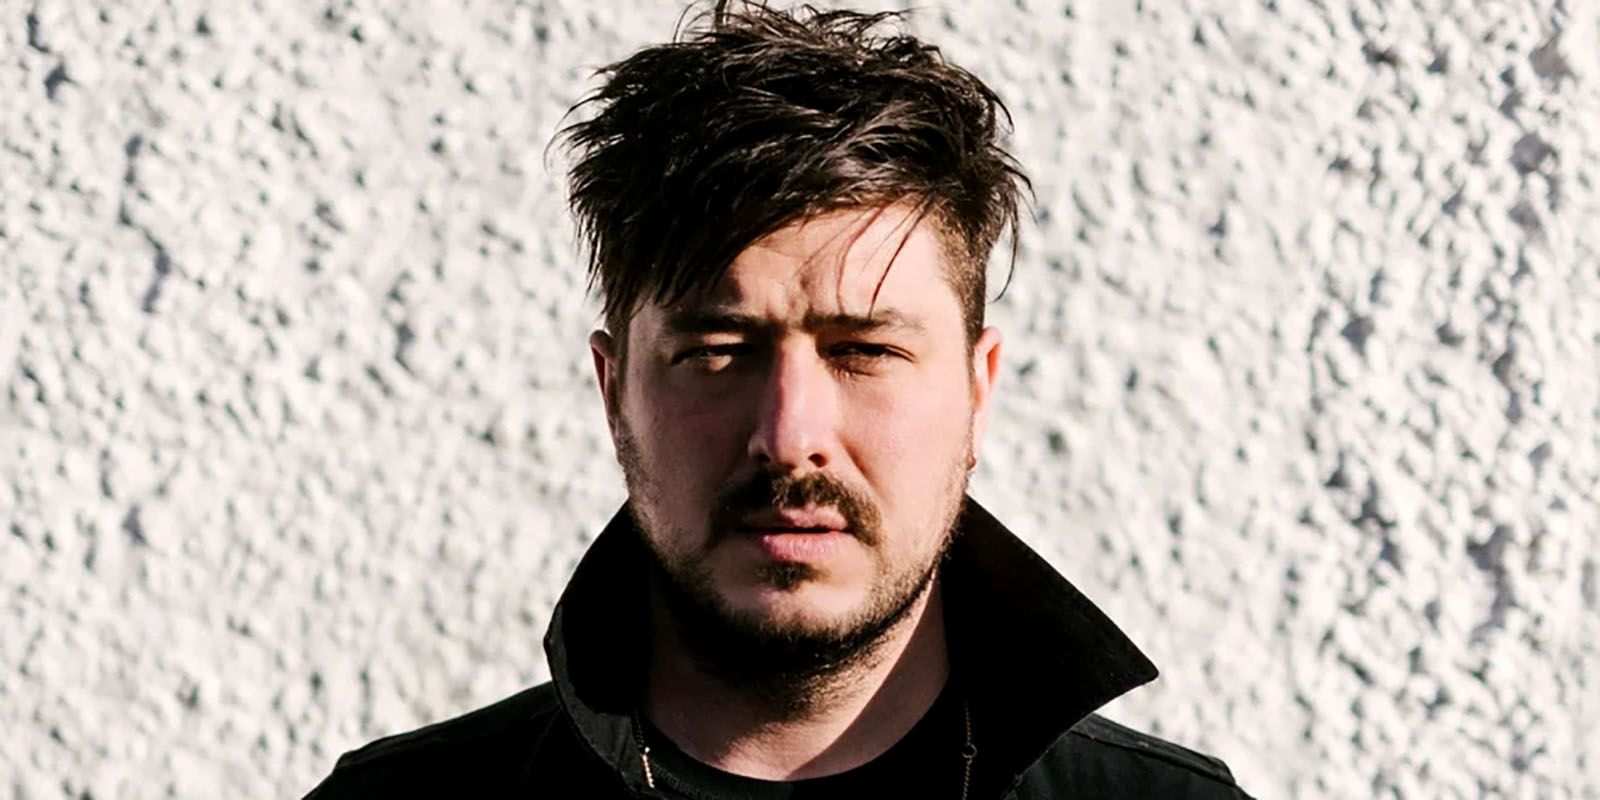 Marcus Mumford will be touring with his band Mumford & Sons.